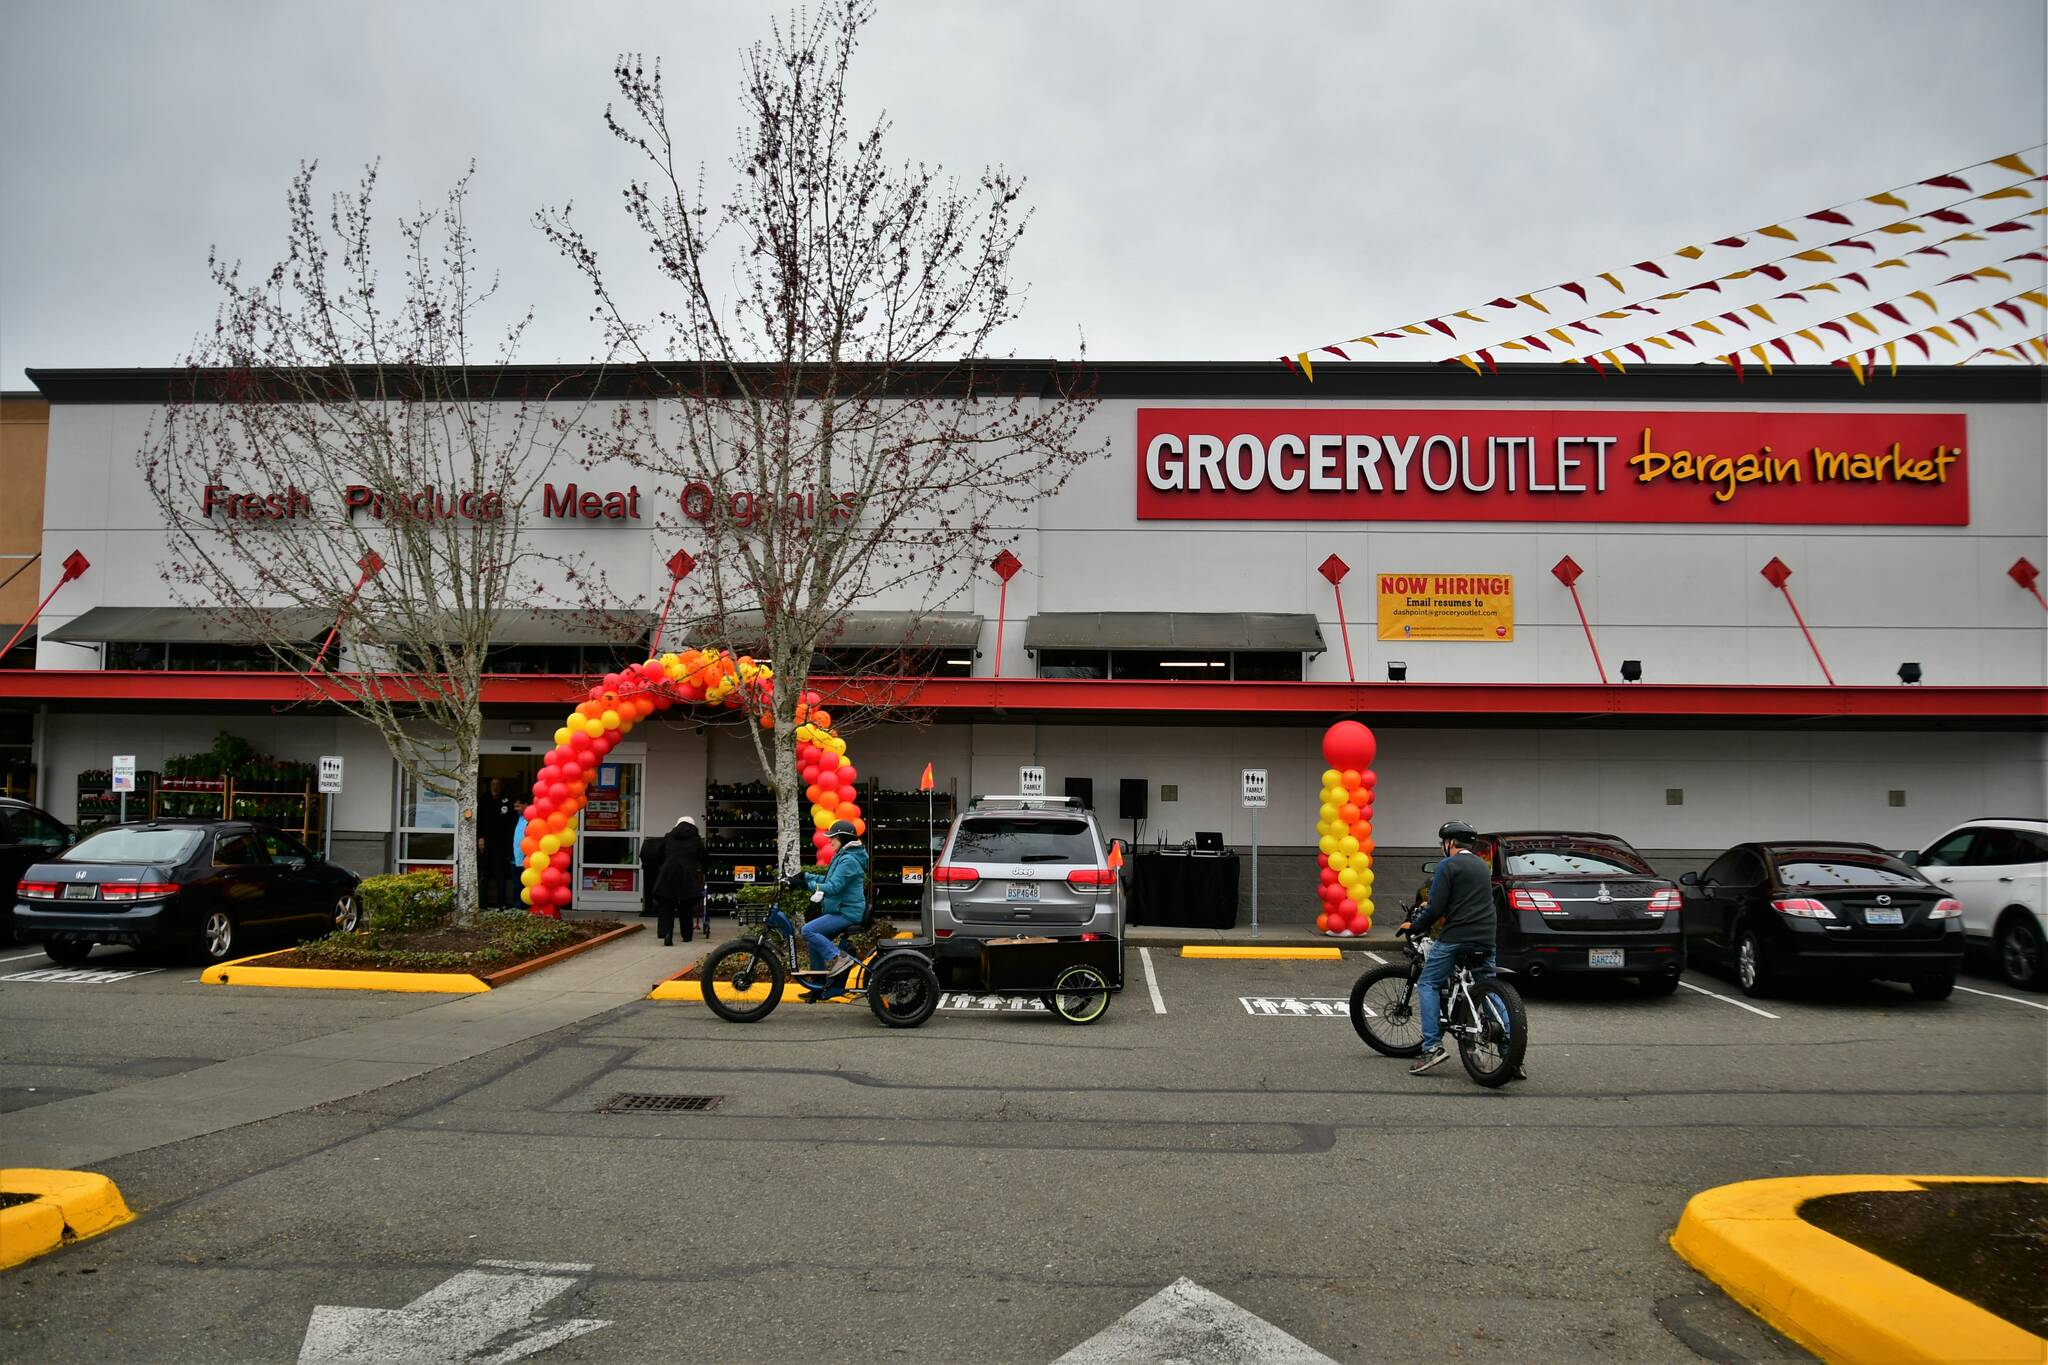 Grocery Outlet takes up a large portion of the former Metropolitan Market in Federal Way. Photo by Bruce Honda.